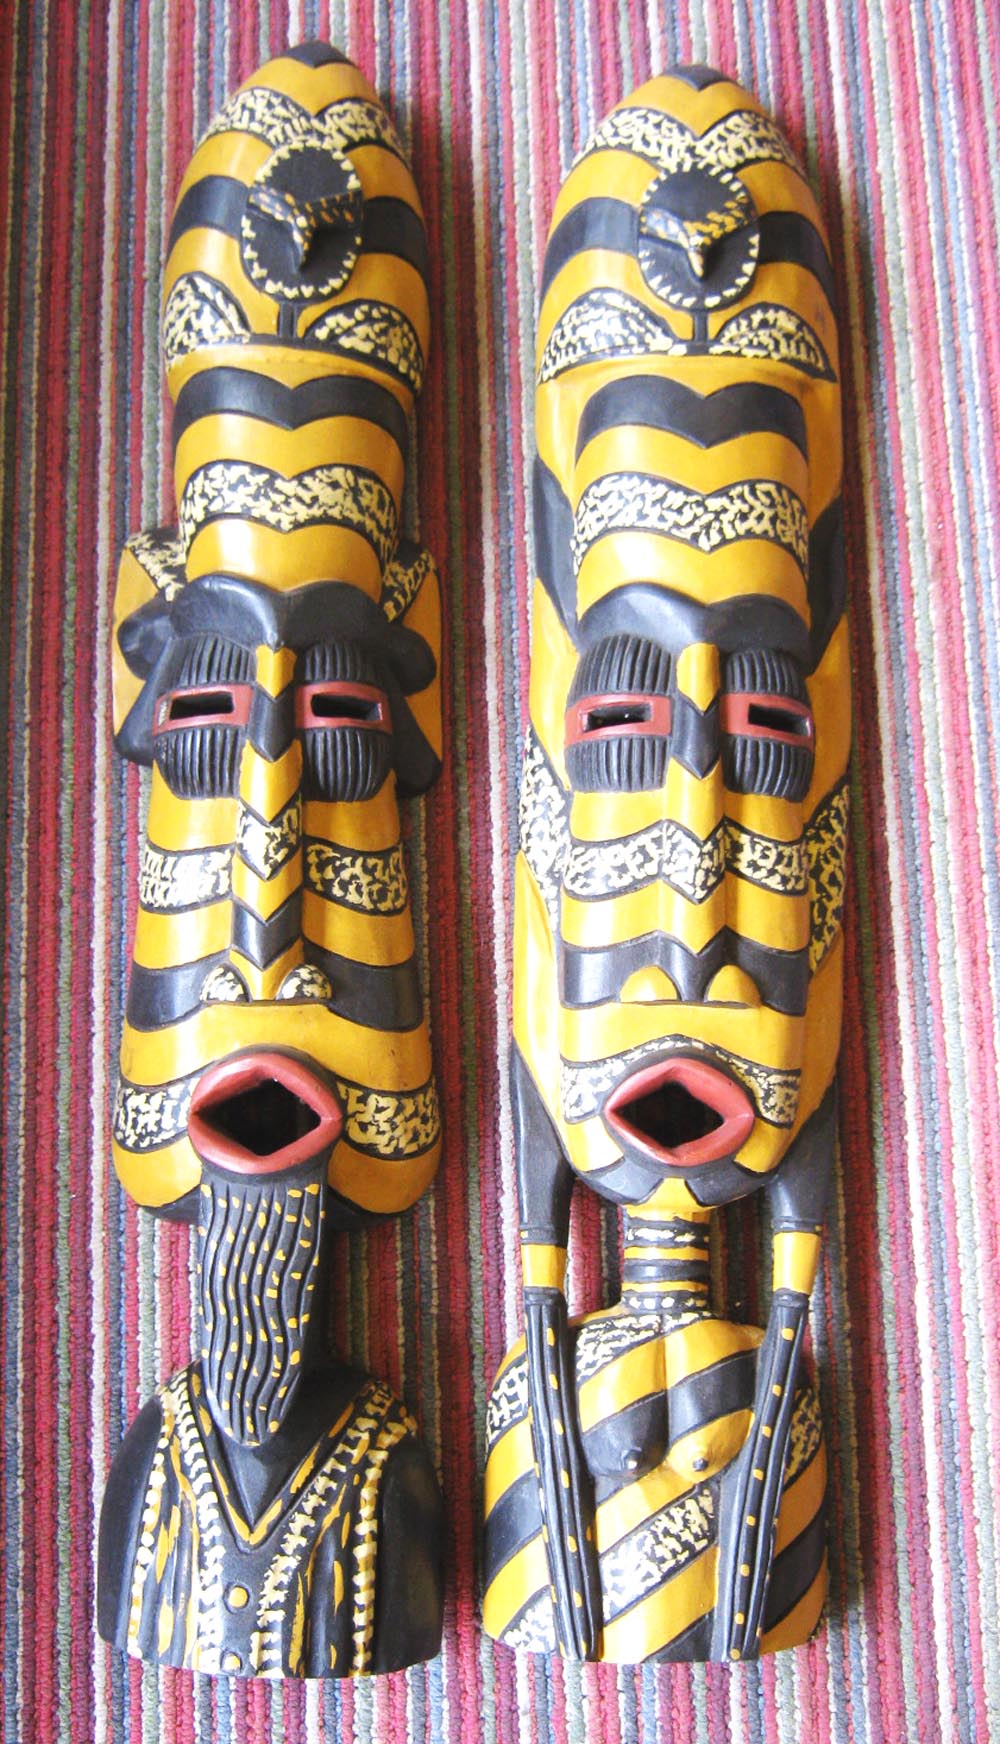 WEST AFRICAN MASKS, a pair, late 20th century, male and female, painted carved wood,